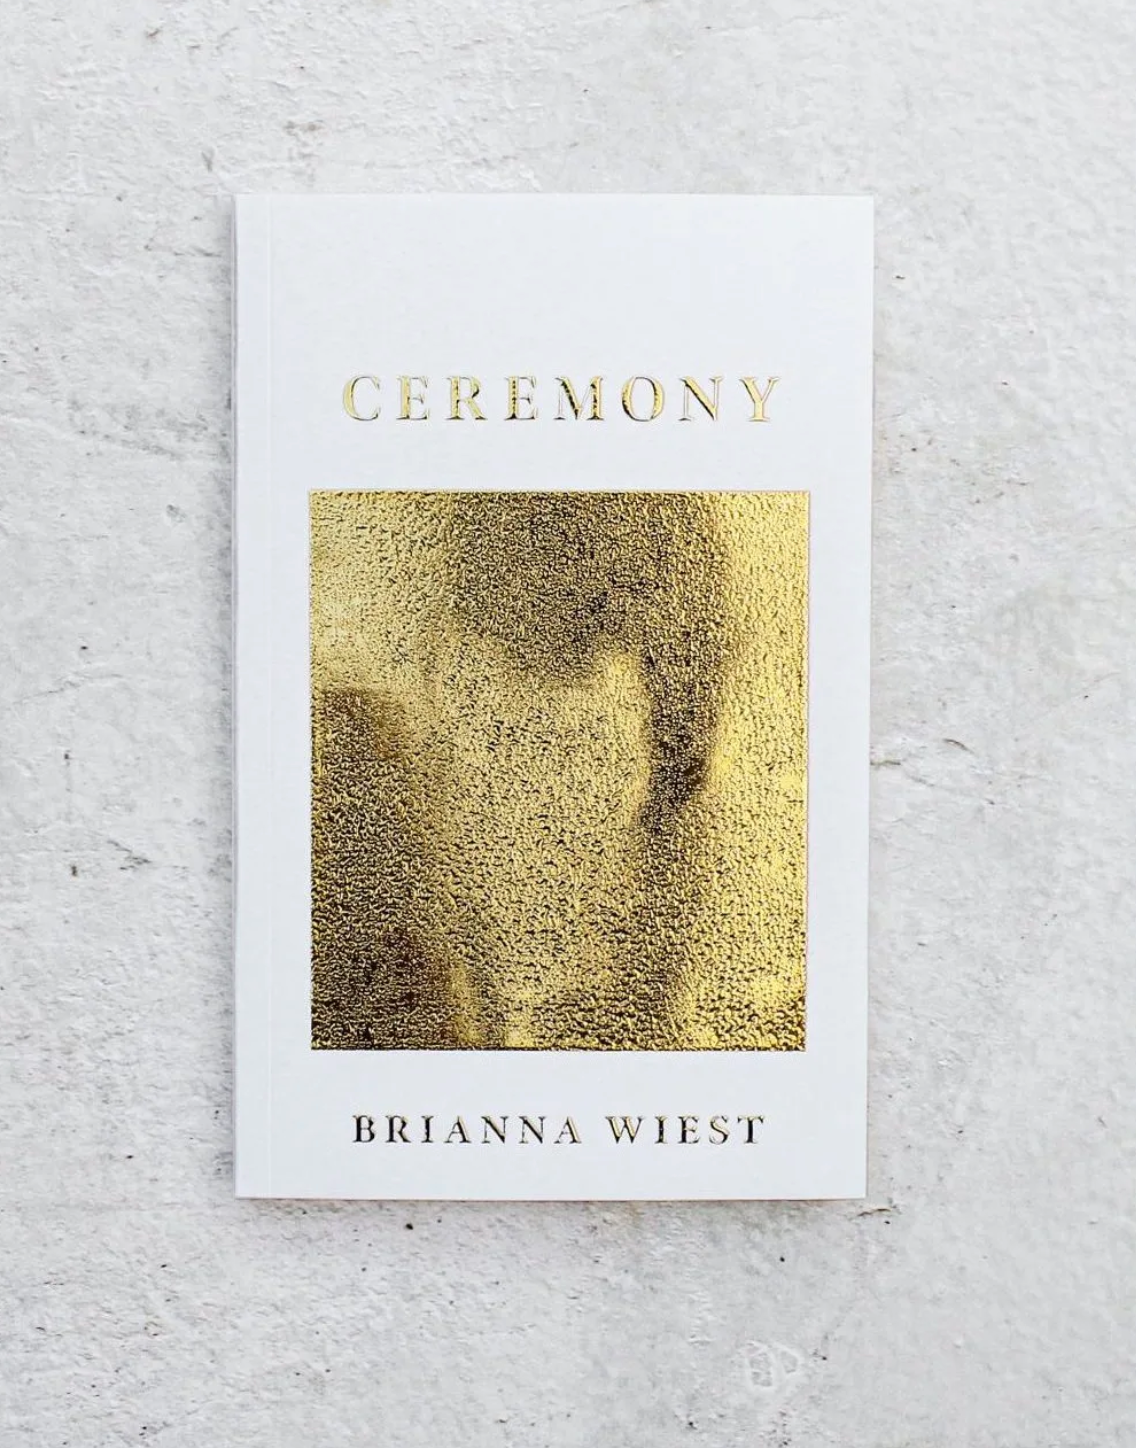 Thought Catalog - Ceremony - book